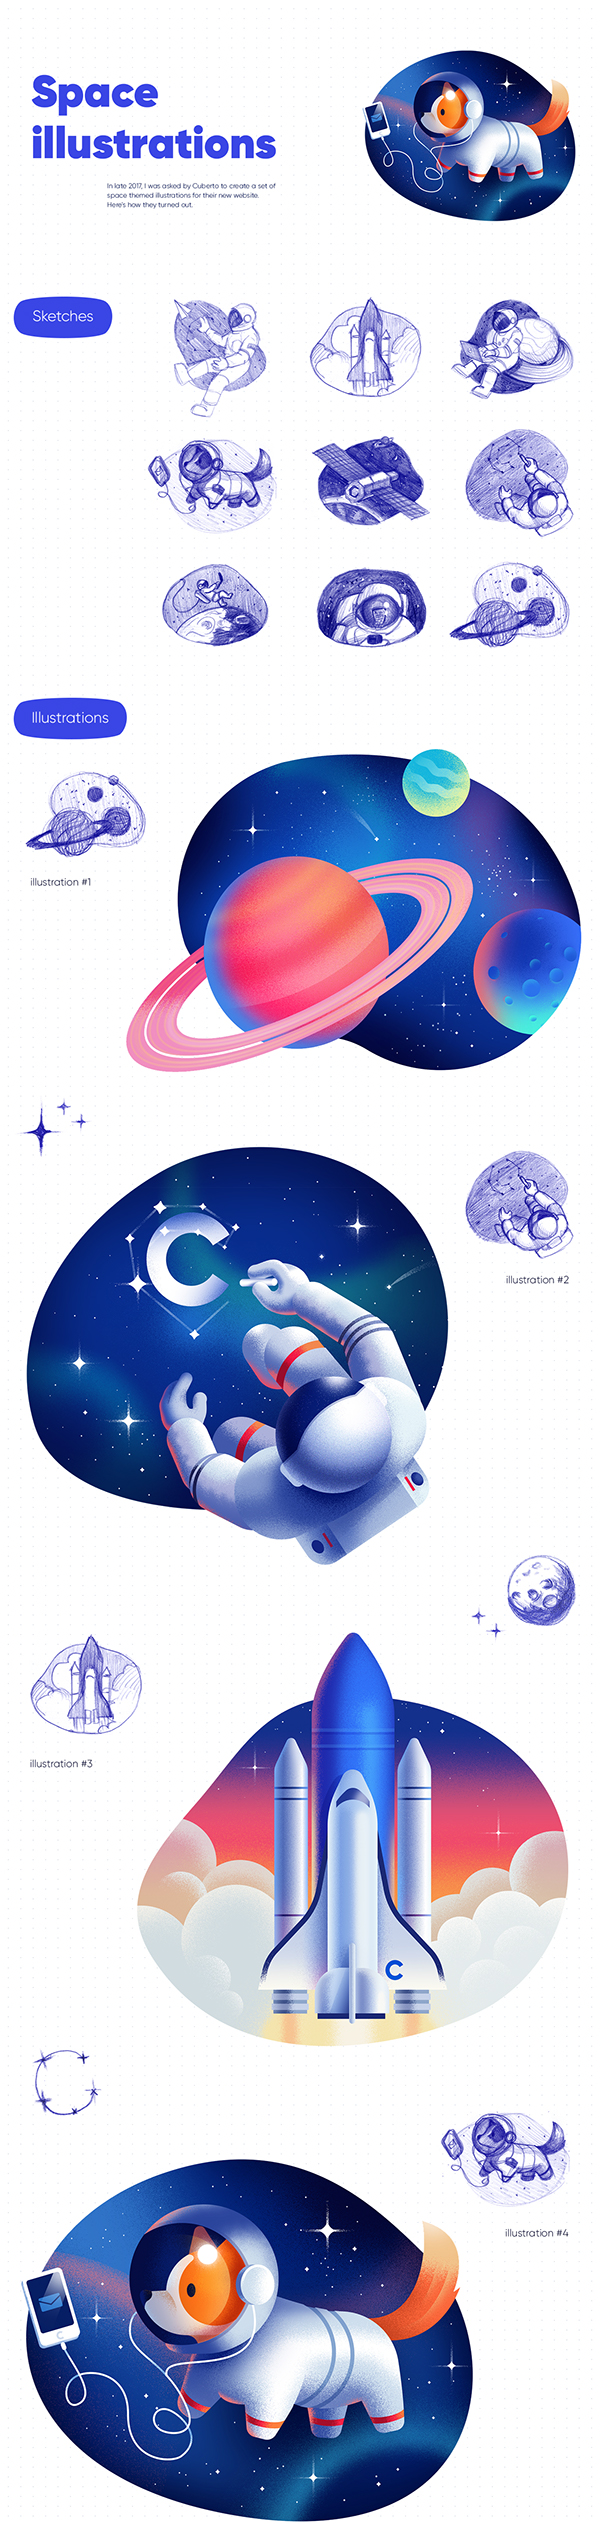 Space Illustrations